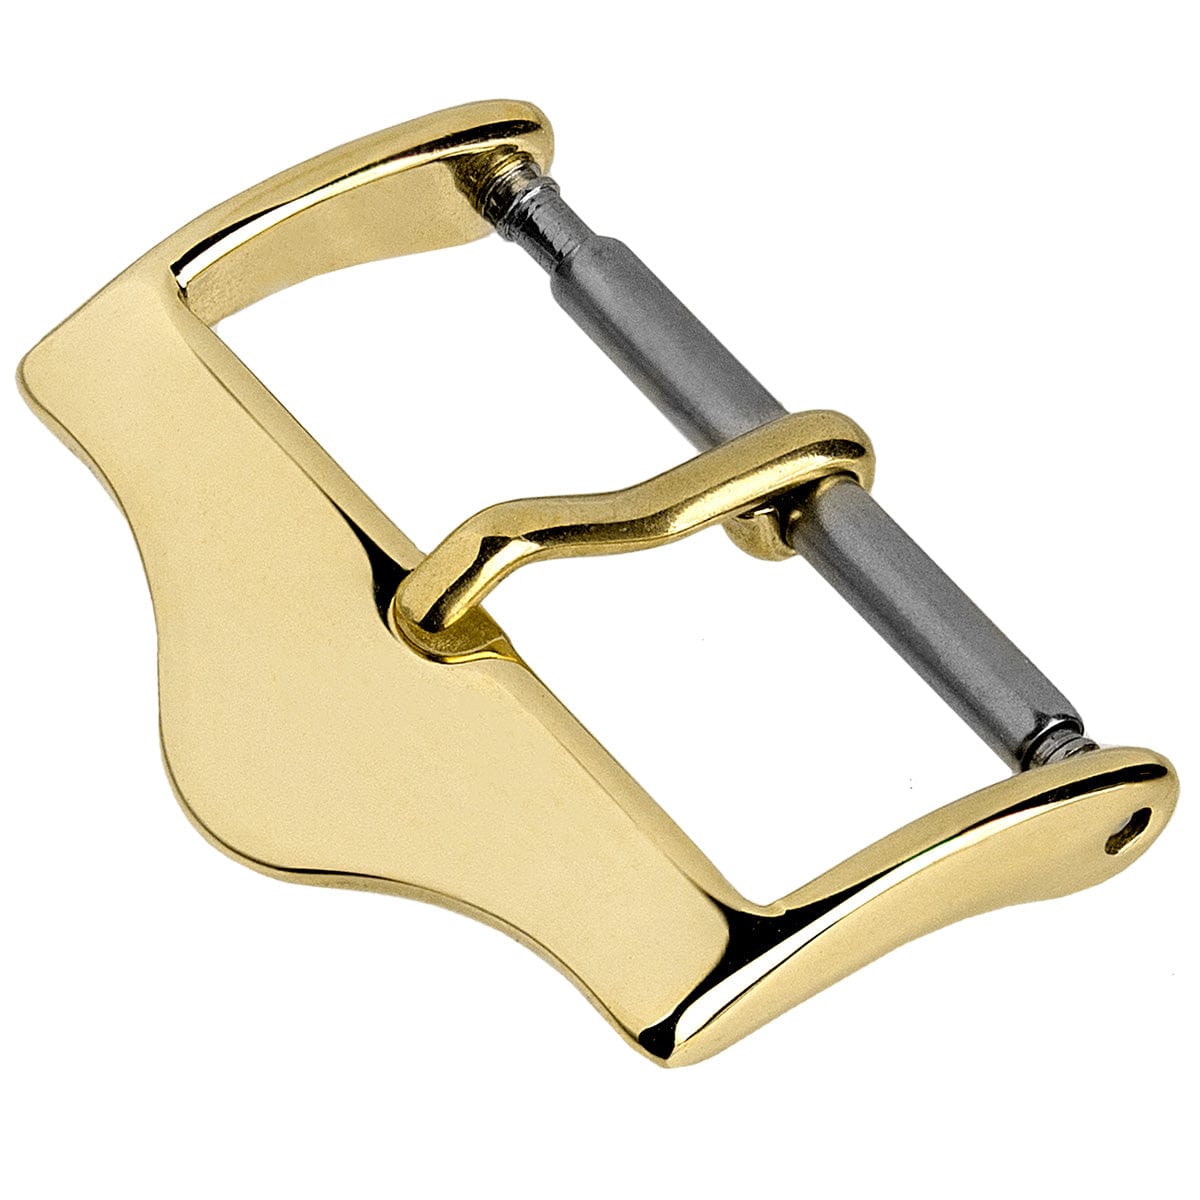 Buckle for Dress Watch Strap - Gold